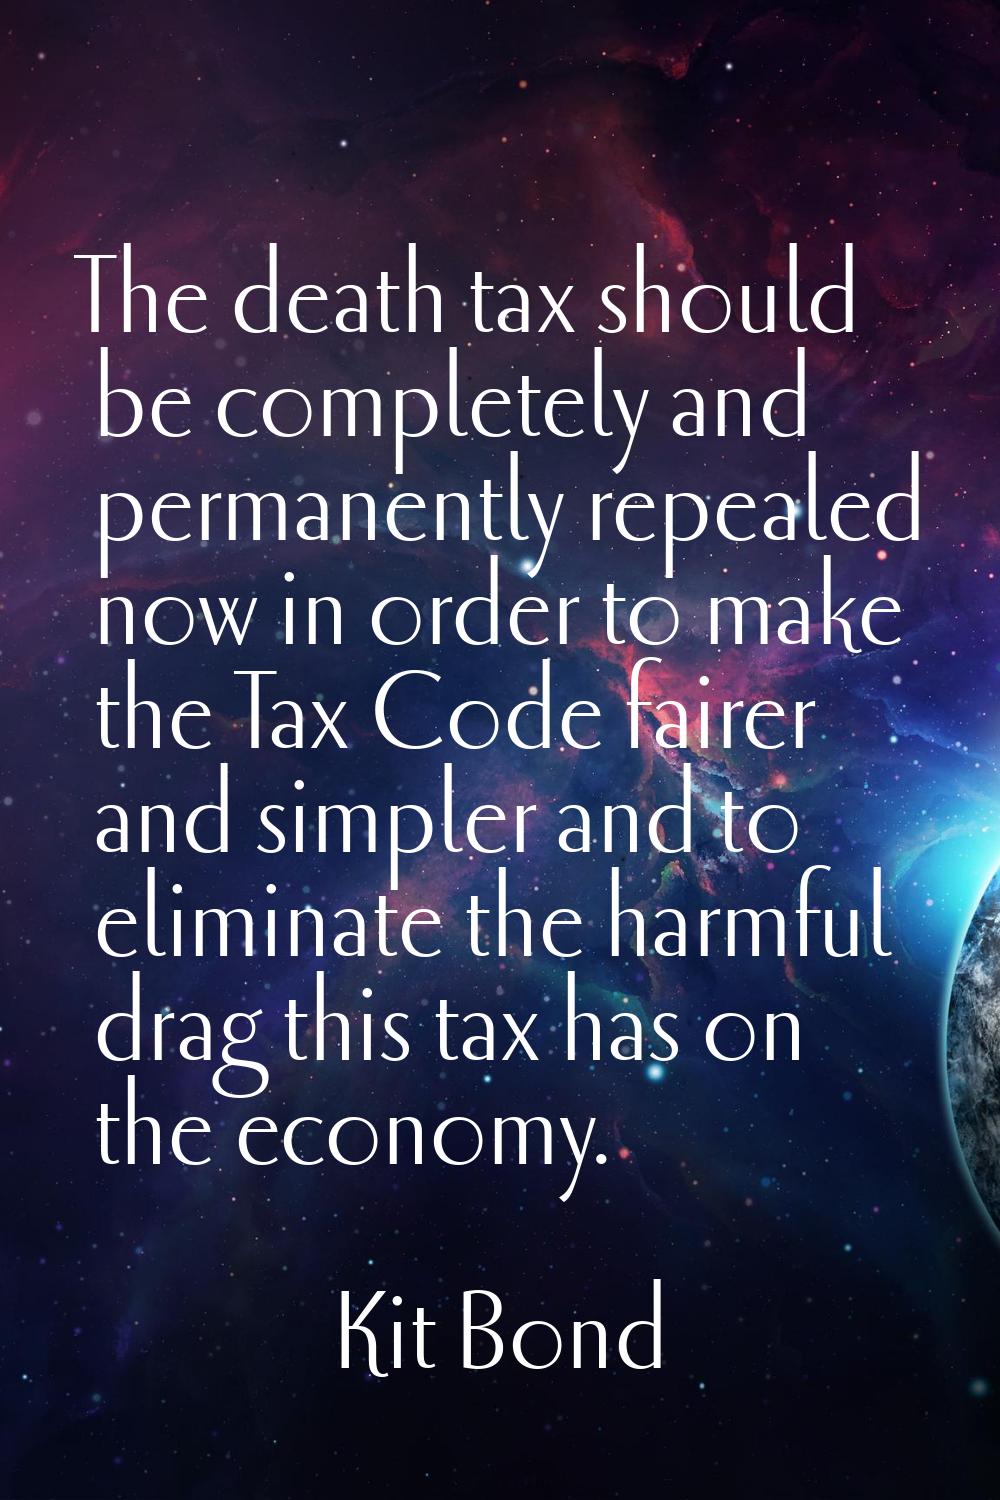 The death tax should be completely and permanently repealed now in order to make the Tax Code faire